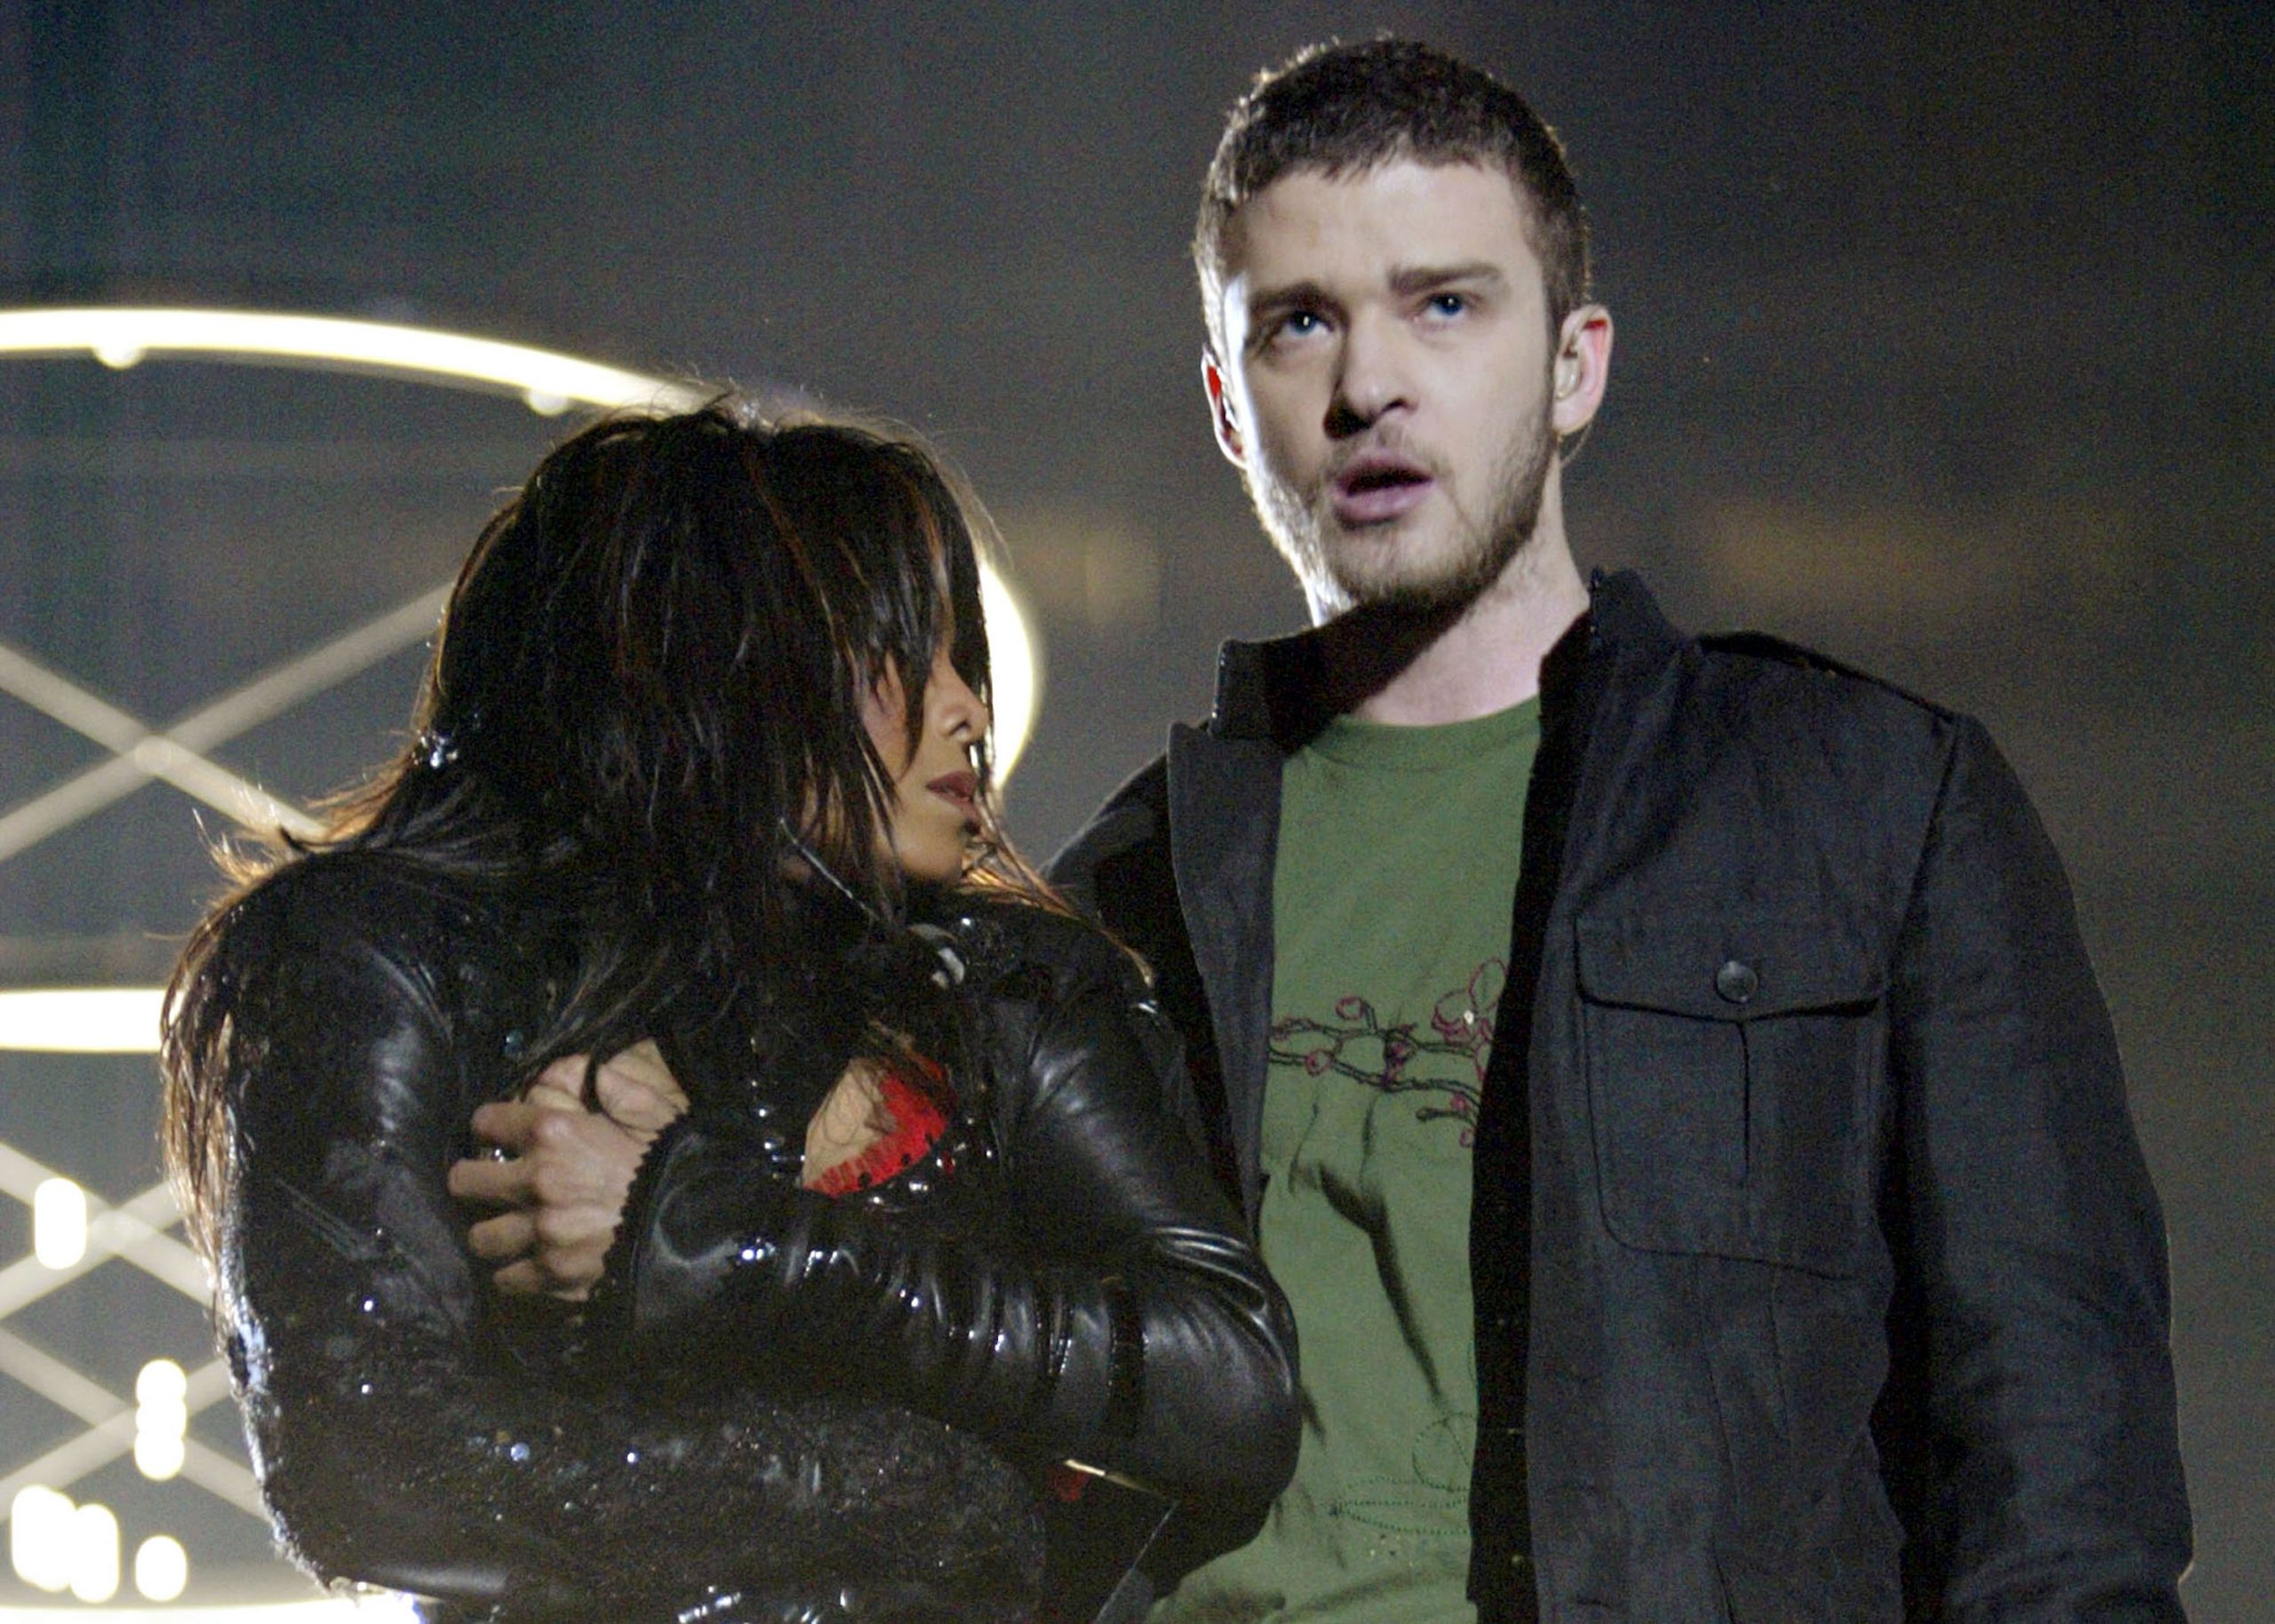 Janet Jackson and Justin Timberlake during the Super Bowl halftime show